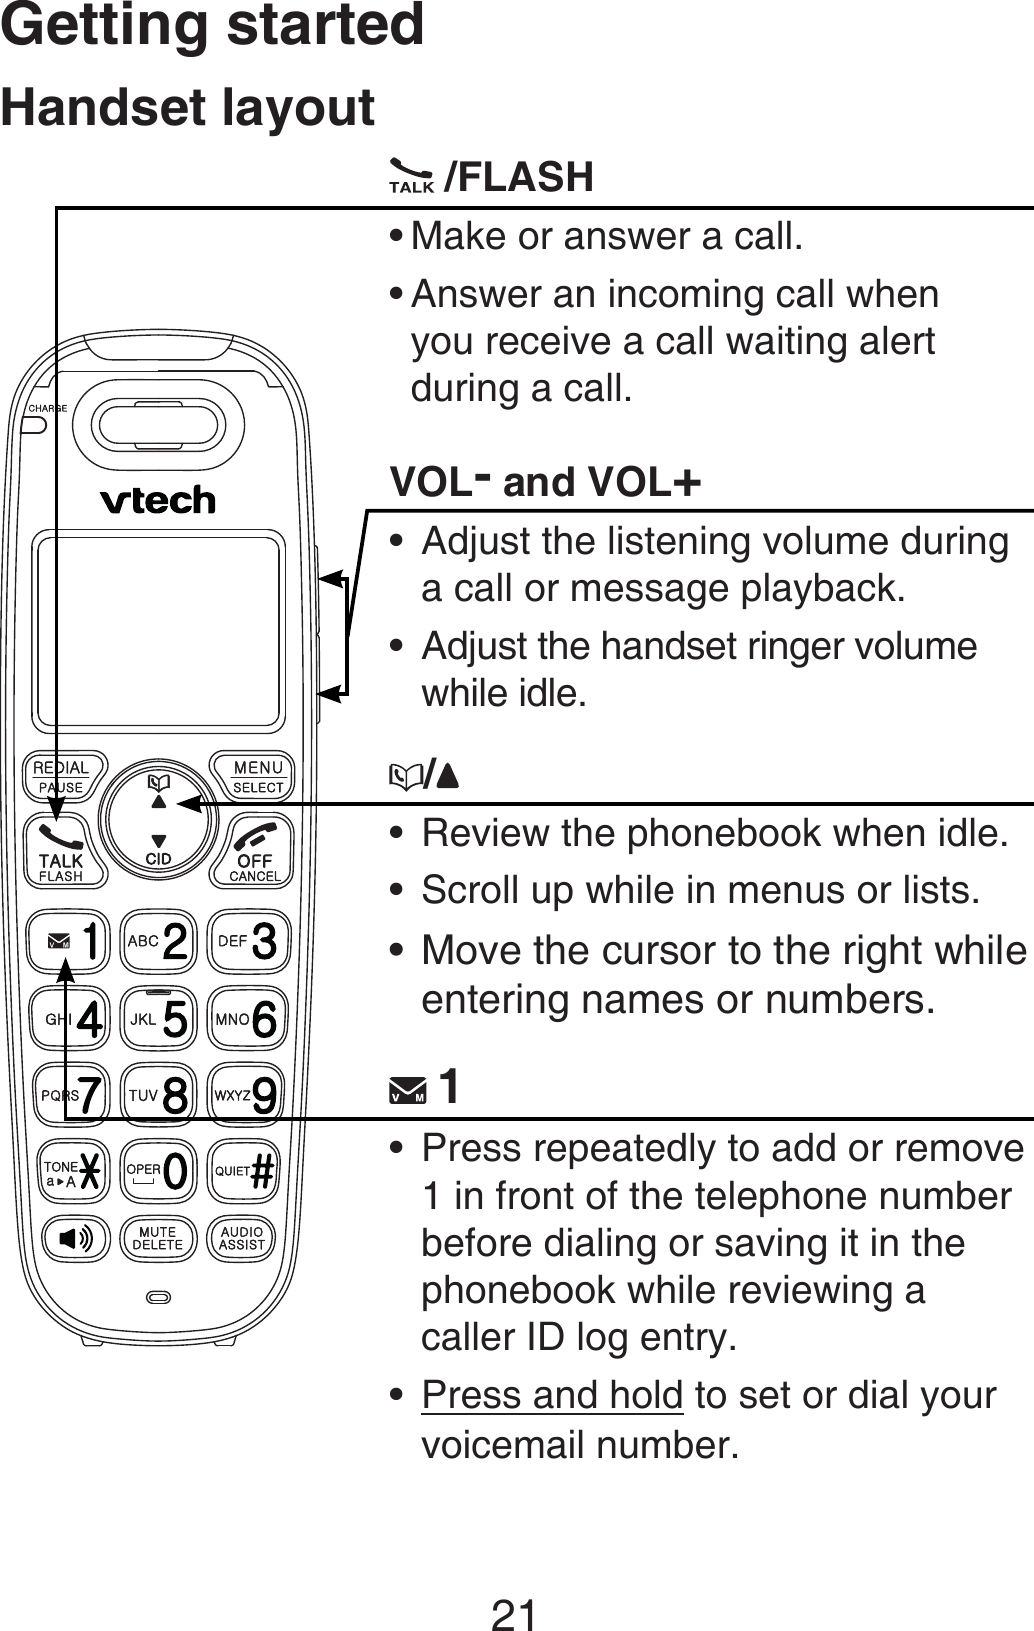 Getting started21Handset layout /FLASHMake or answer a call.Answer an incoming call when  you receive a call waiting alert during a call.VOL- and VOL+Adjust the listening volume during a call or message playback.Adjust the handset ringer volume while idle./Review the phonebook when idle.Scroll up while in menus or lists.Move the cursor to the right while entering names or numbers. 1Press repeatedly to add or remove 1 in front of the telephone number before dialing or saving it in the phonebook while reviewing a caller ID log entry.Press and hold to set or dial your voicemail number.•••••••••